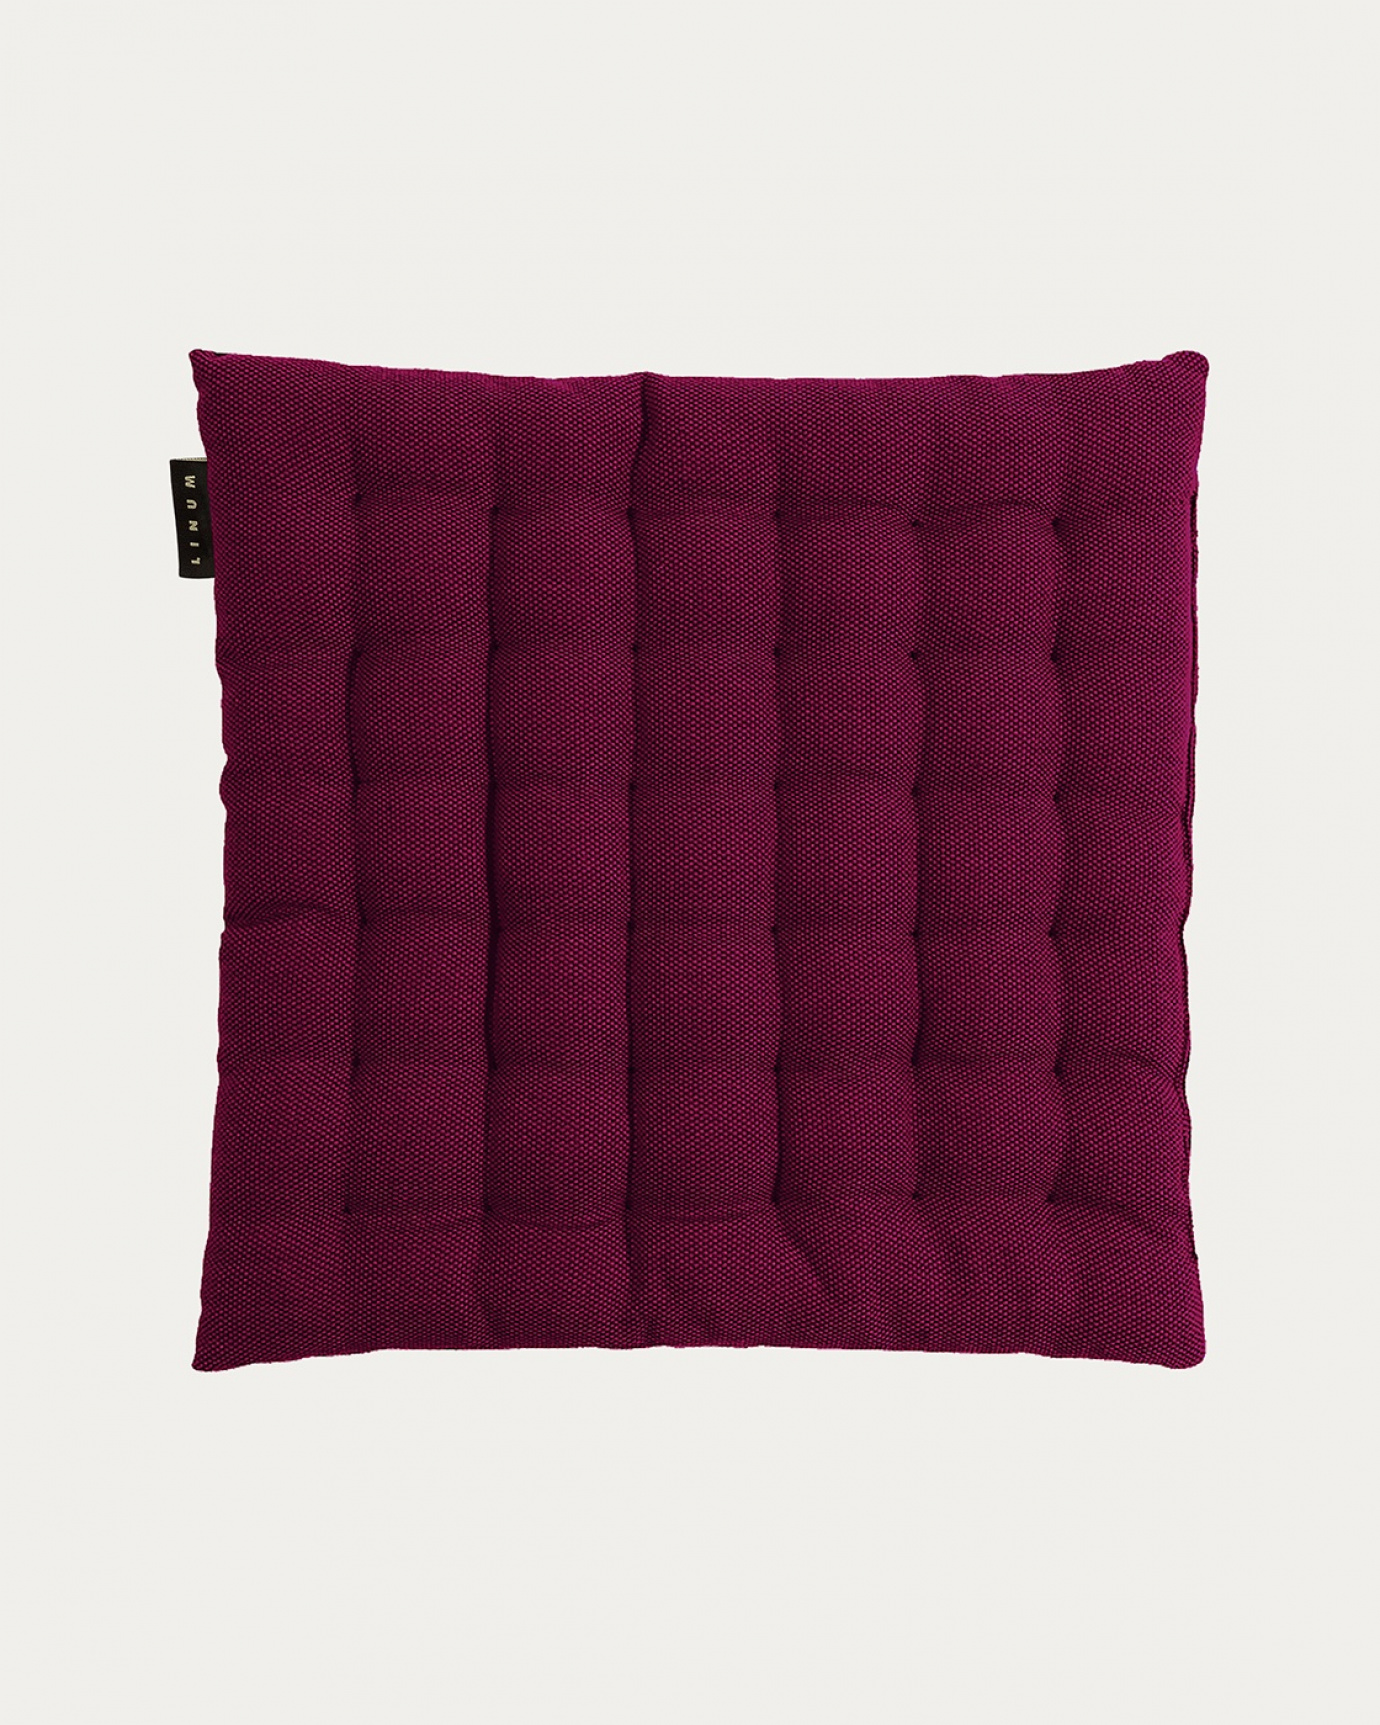 Product image burgundy red PEPPER seat cushion made of soft cotton with recycled polyester filling from LINUM DESIGN. Size 40x40 cm.